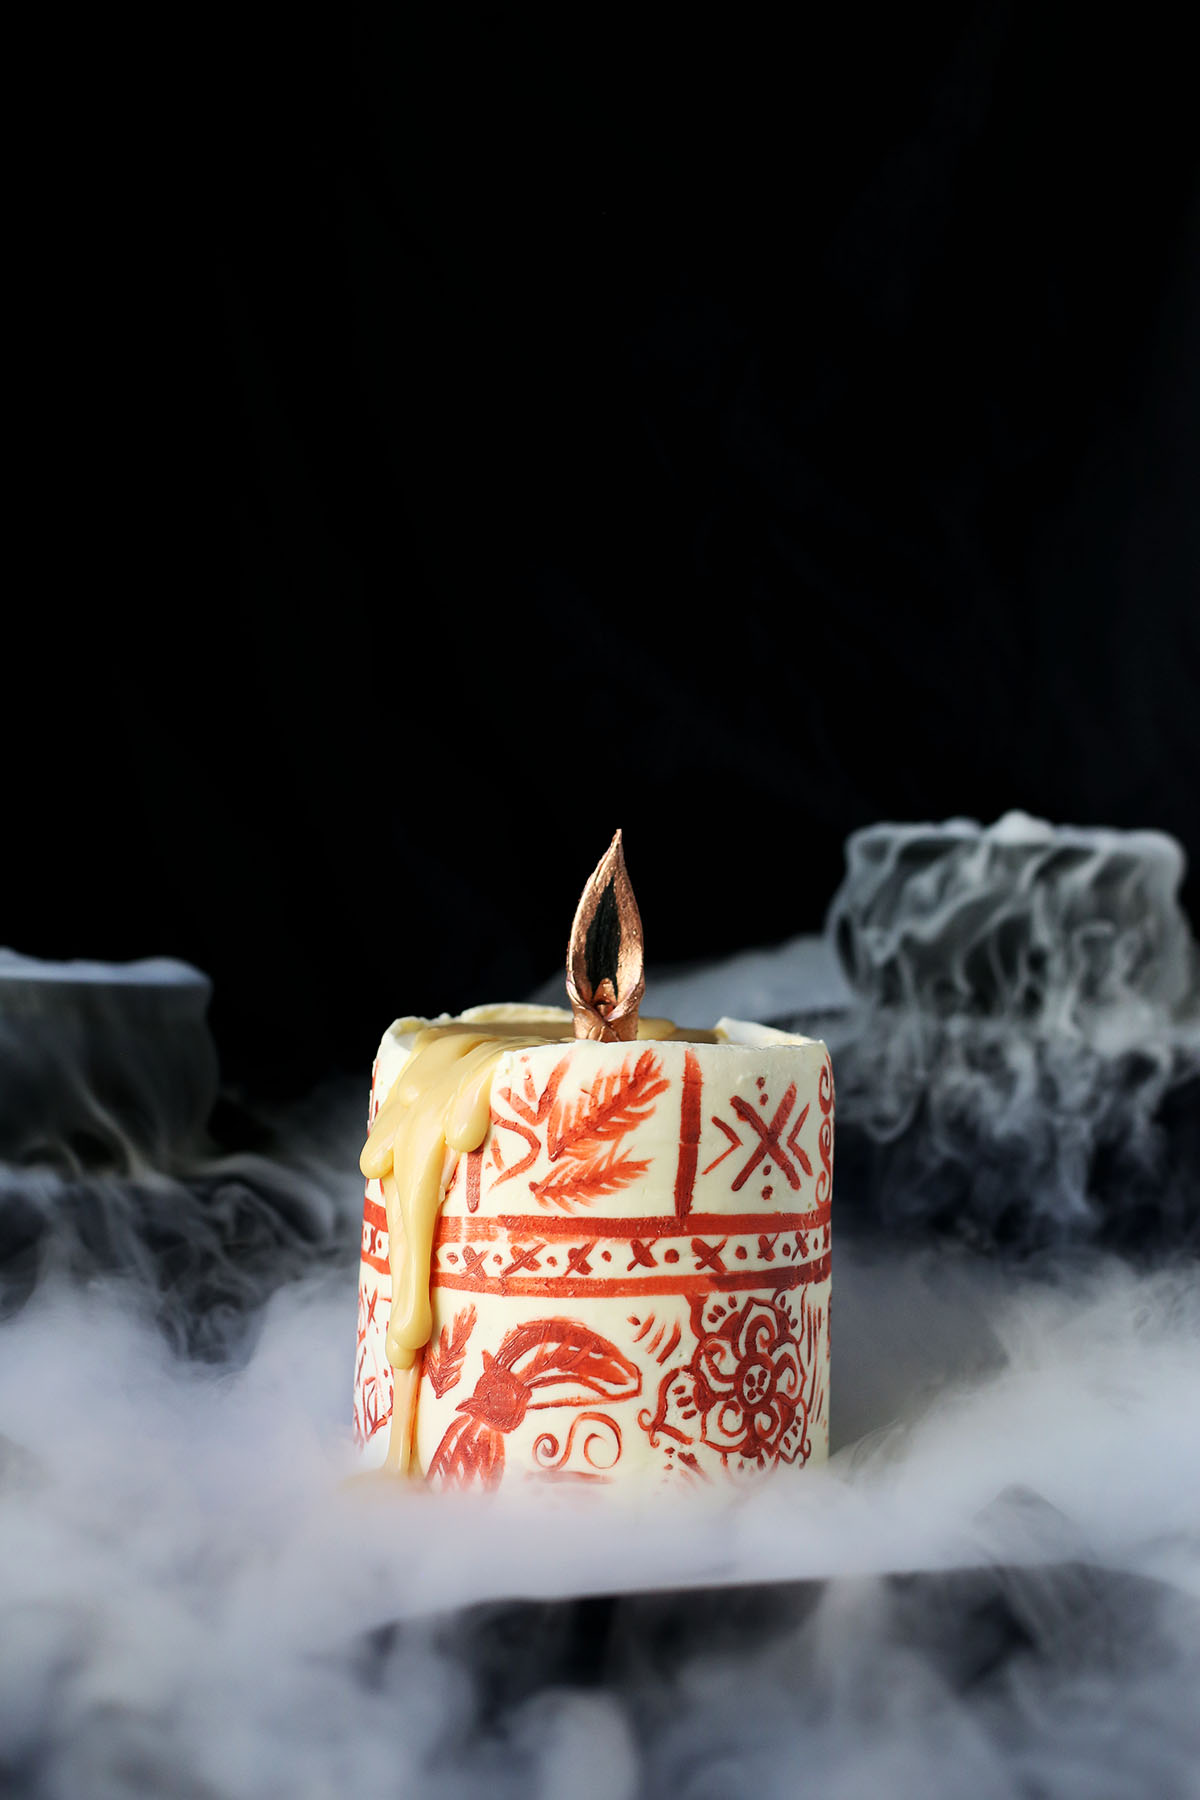 Hocus Pocus themed Chocolate and Pumpkin Black Flame Candle Cake